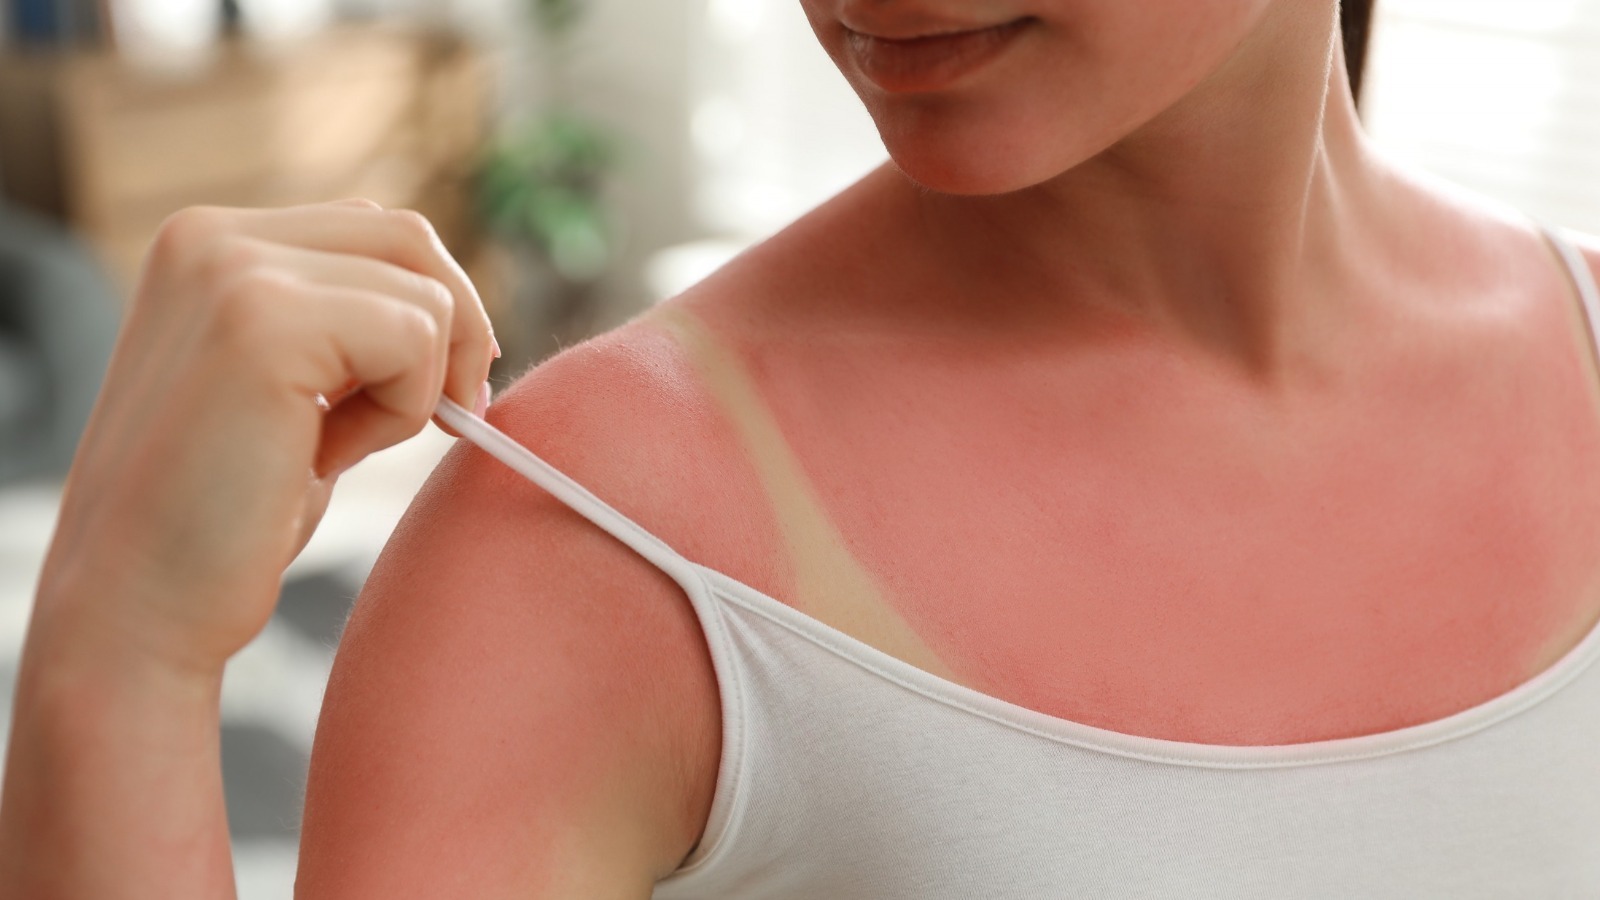 Bad Sunburns: The First Thing to Do